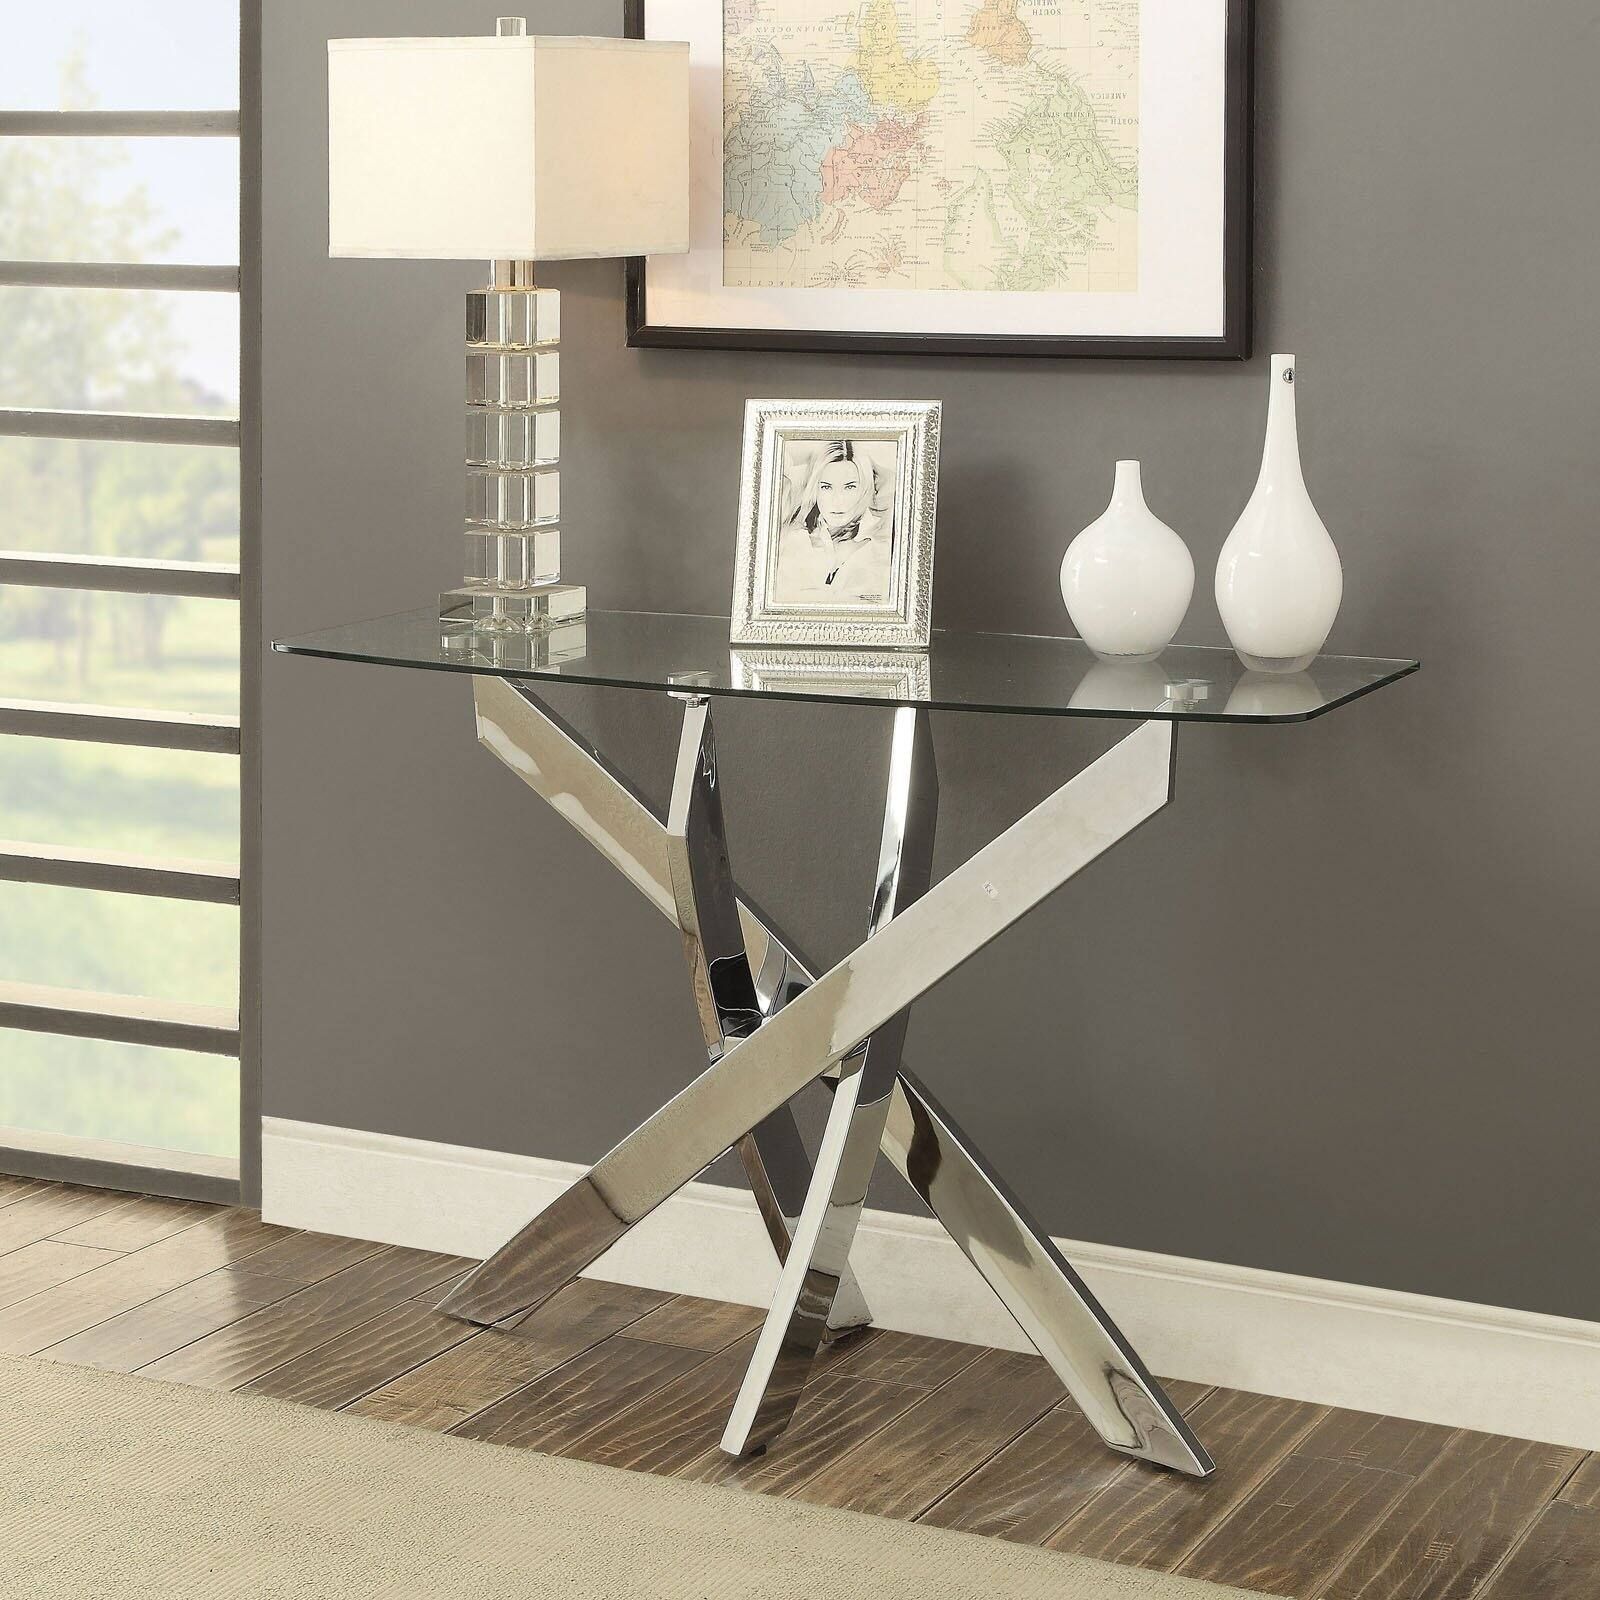 Furniture Of America Myron Contemporary Style Chrome Base Sofa Table Inside Mirrored And Chrome Modern Console Tables (View 2 of 20)